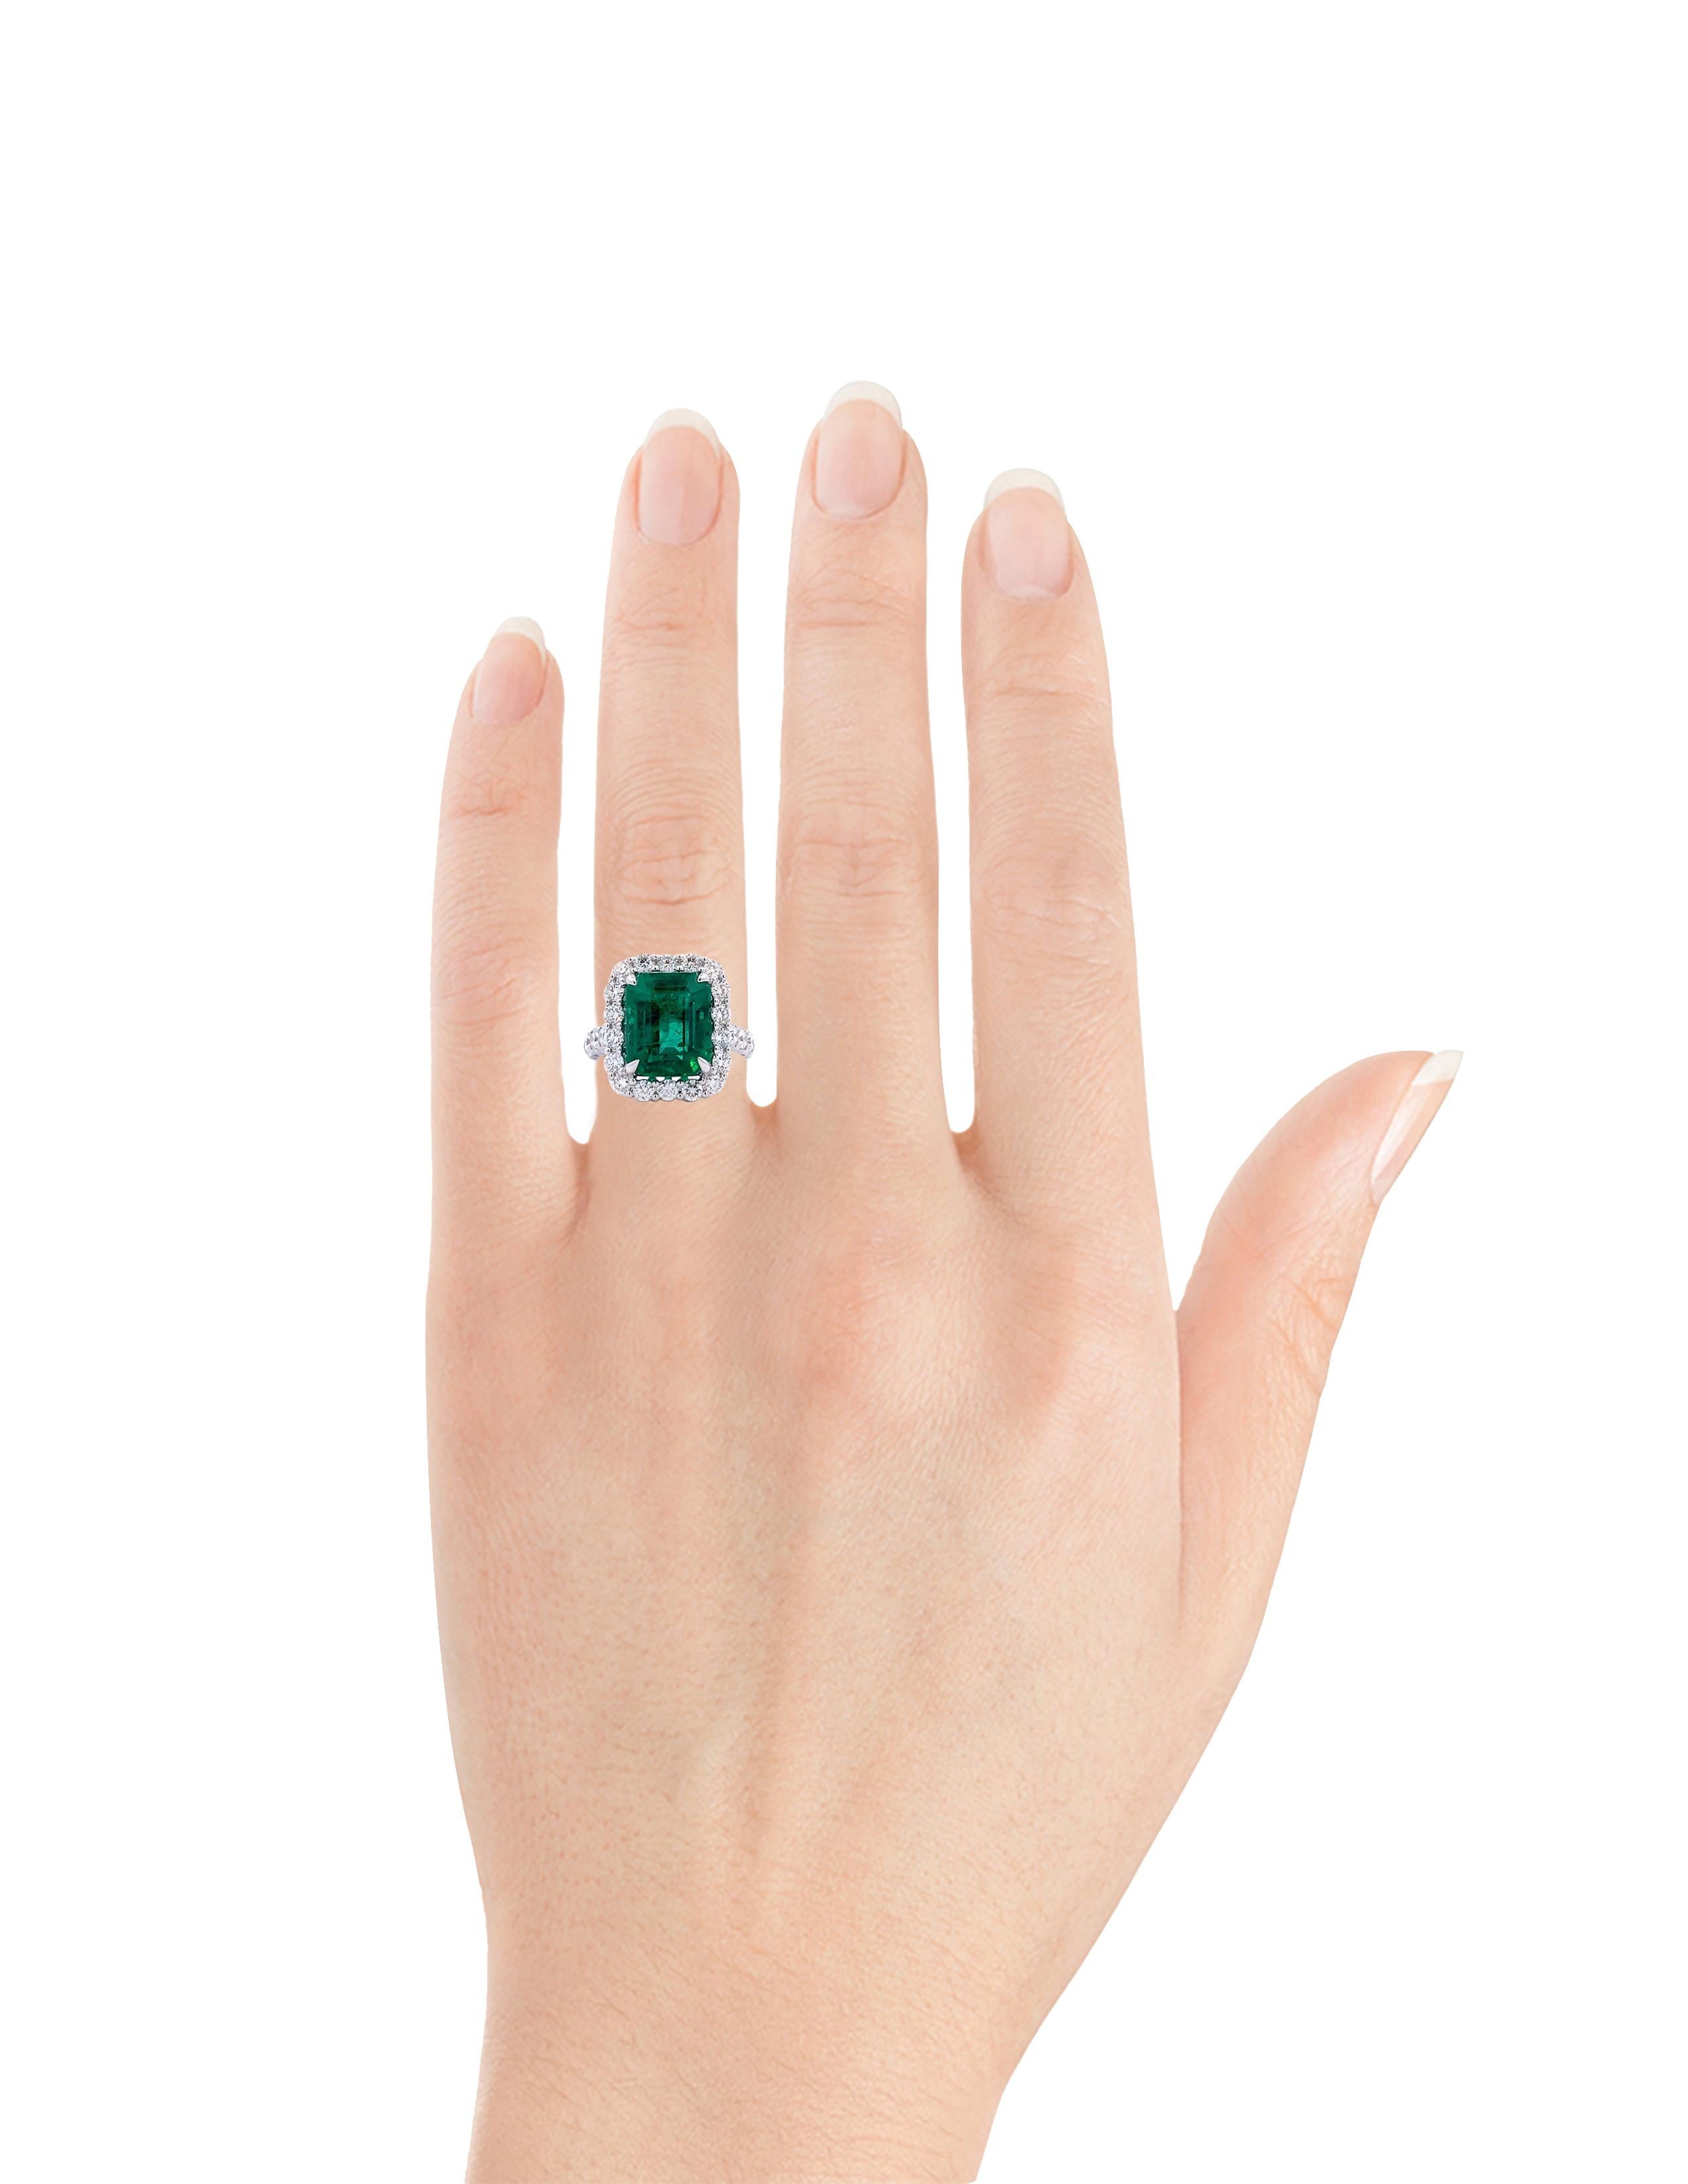 One of our newest and finest pieces - A large, Emerald Cut Emerald on a Halo Ring, crafted by BleauNy. 

Emerald Cut Emerald - 7.47ct
Diamonds - 1.77ct
Ring Metal - 18k White Gold
